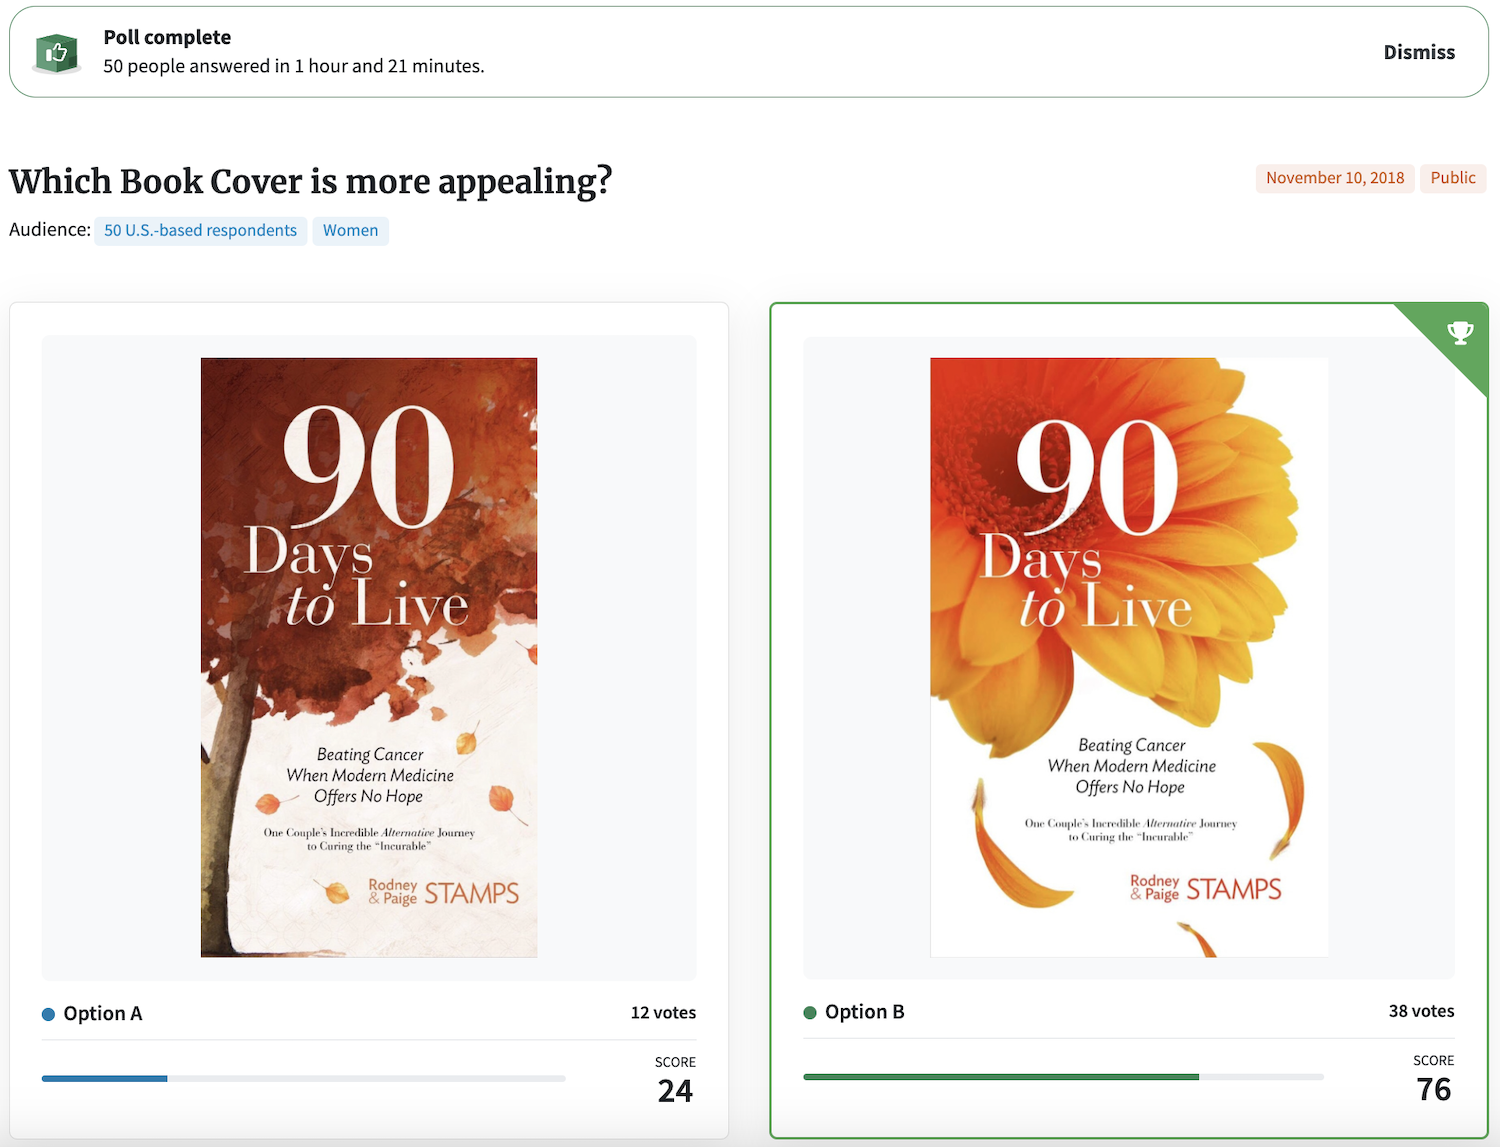 Screenshot of PickFu poll testing a book cover design for a book titled "90 Days to Live."